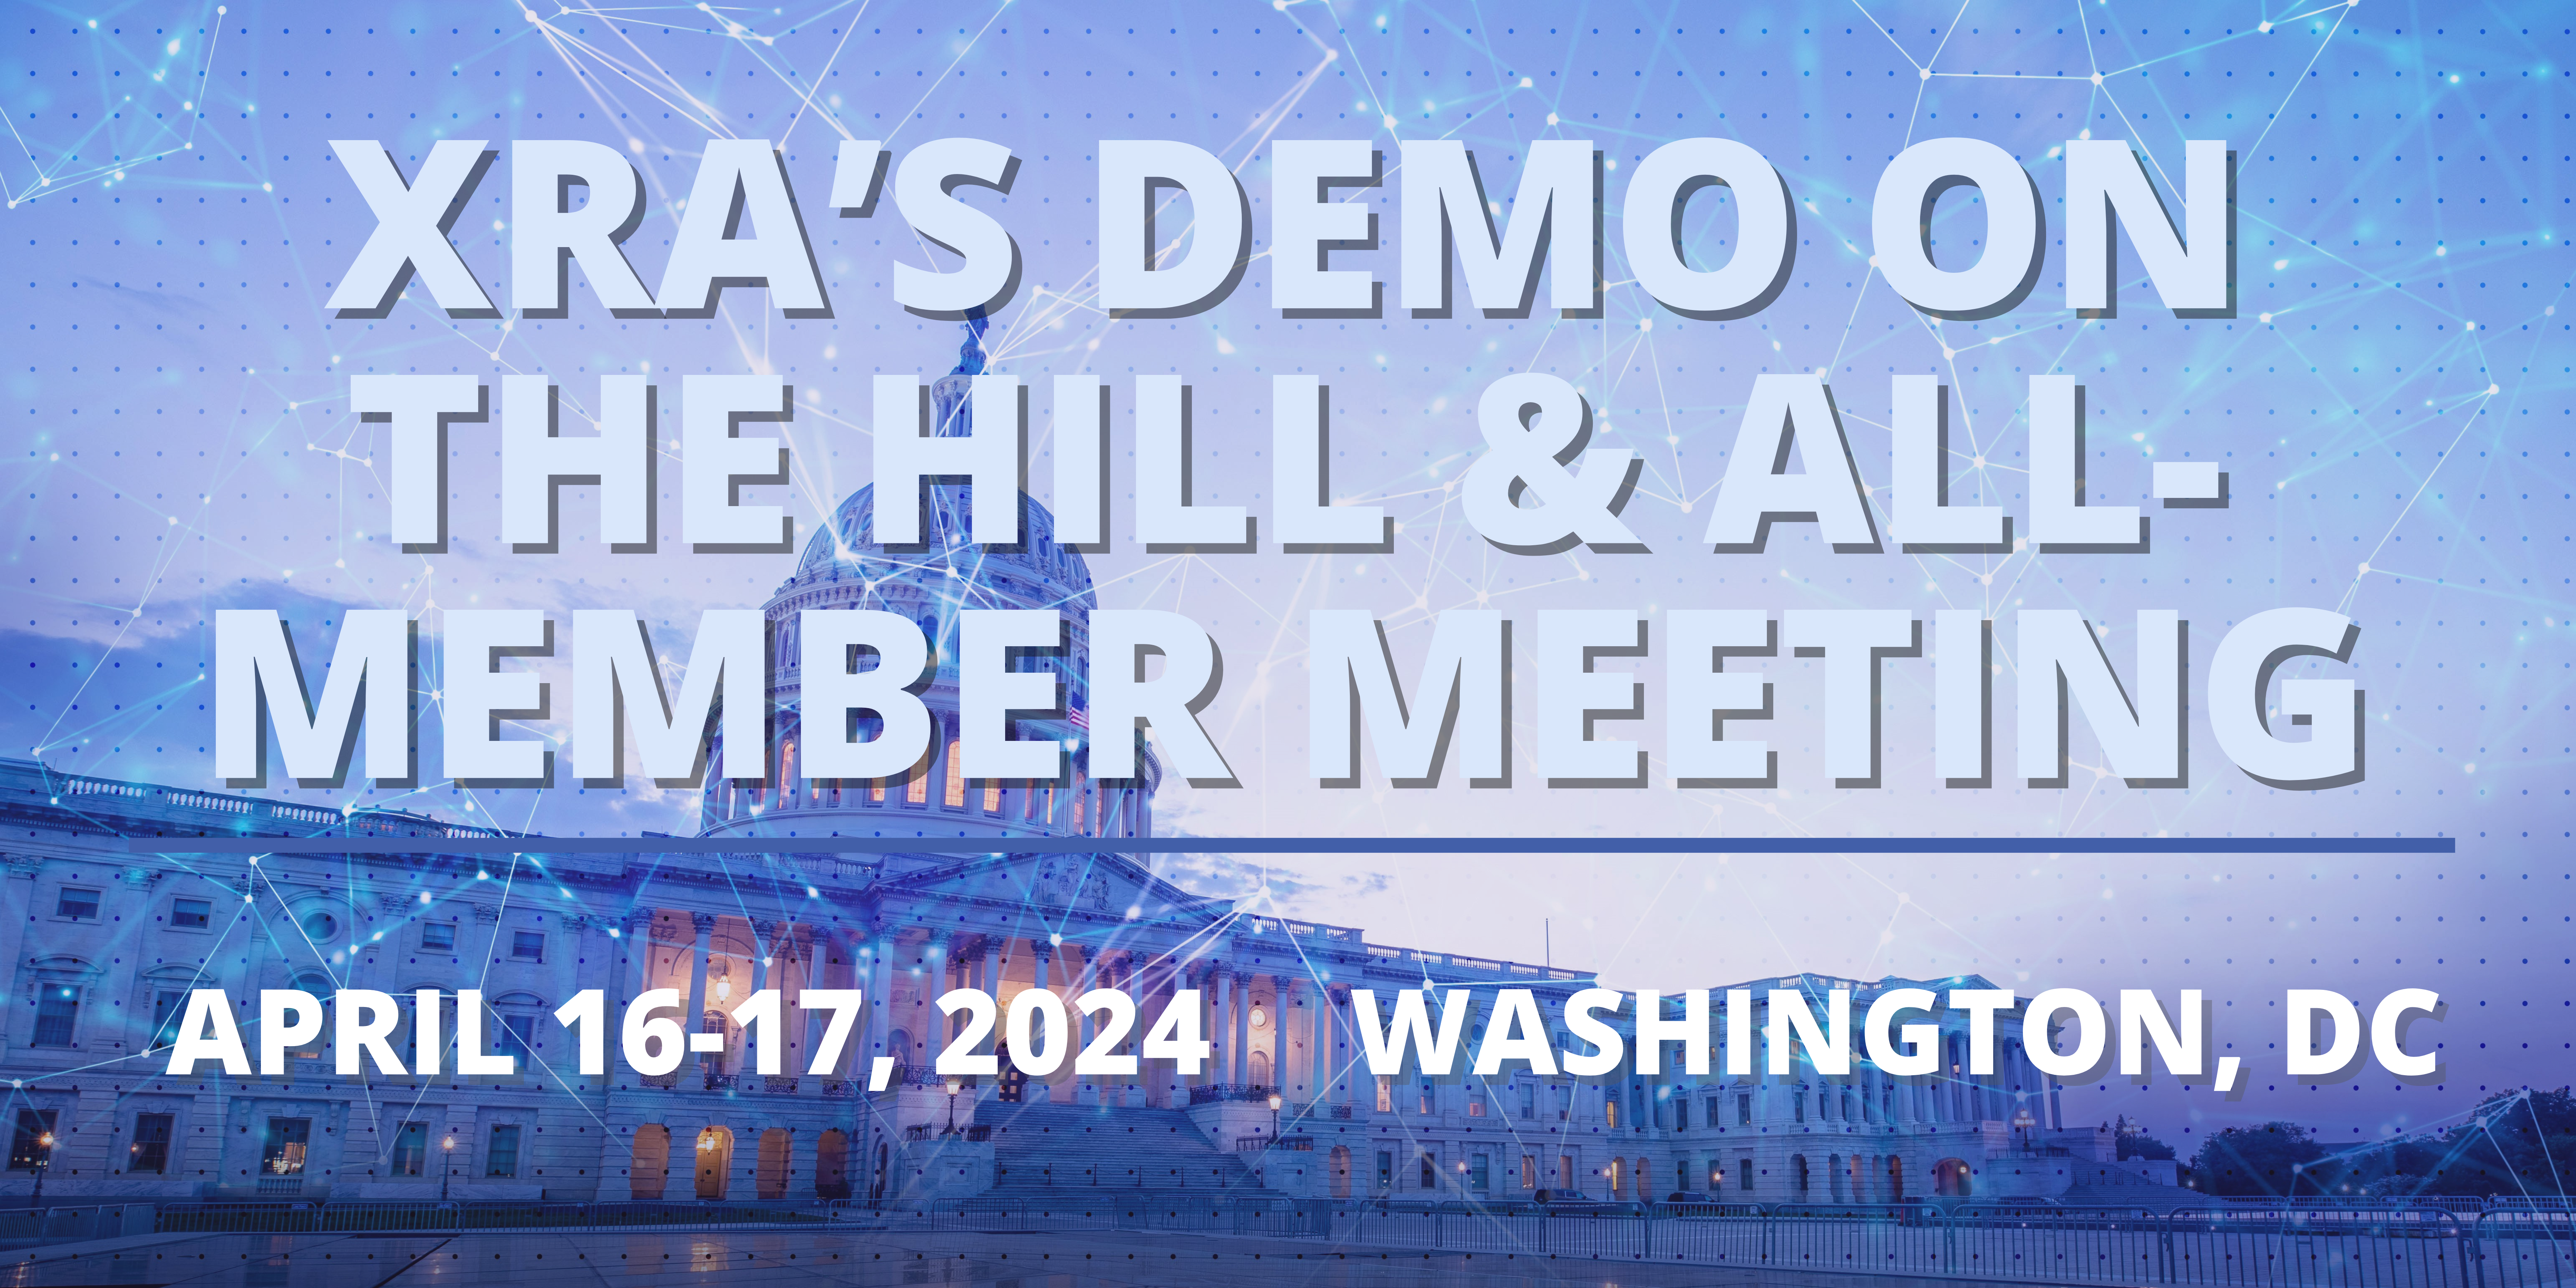 THIS WEEK: XRA’S DEMO ON THE HILL AND ALL-MEMBER MEETING